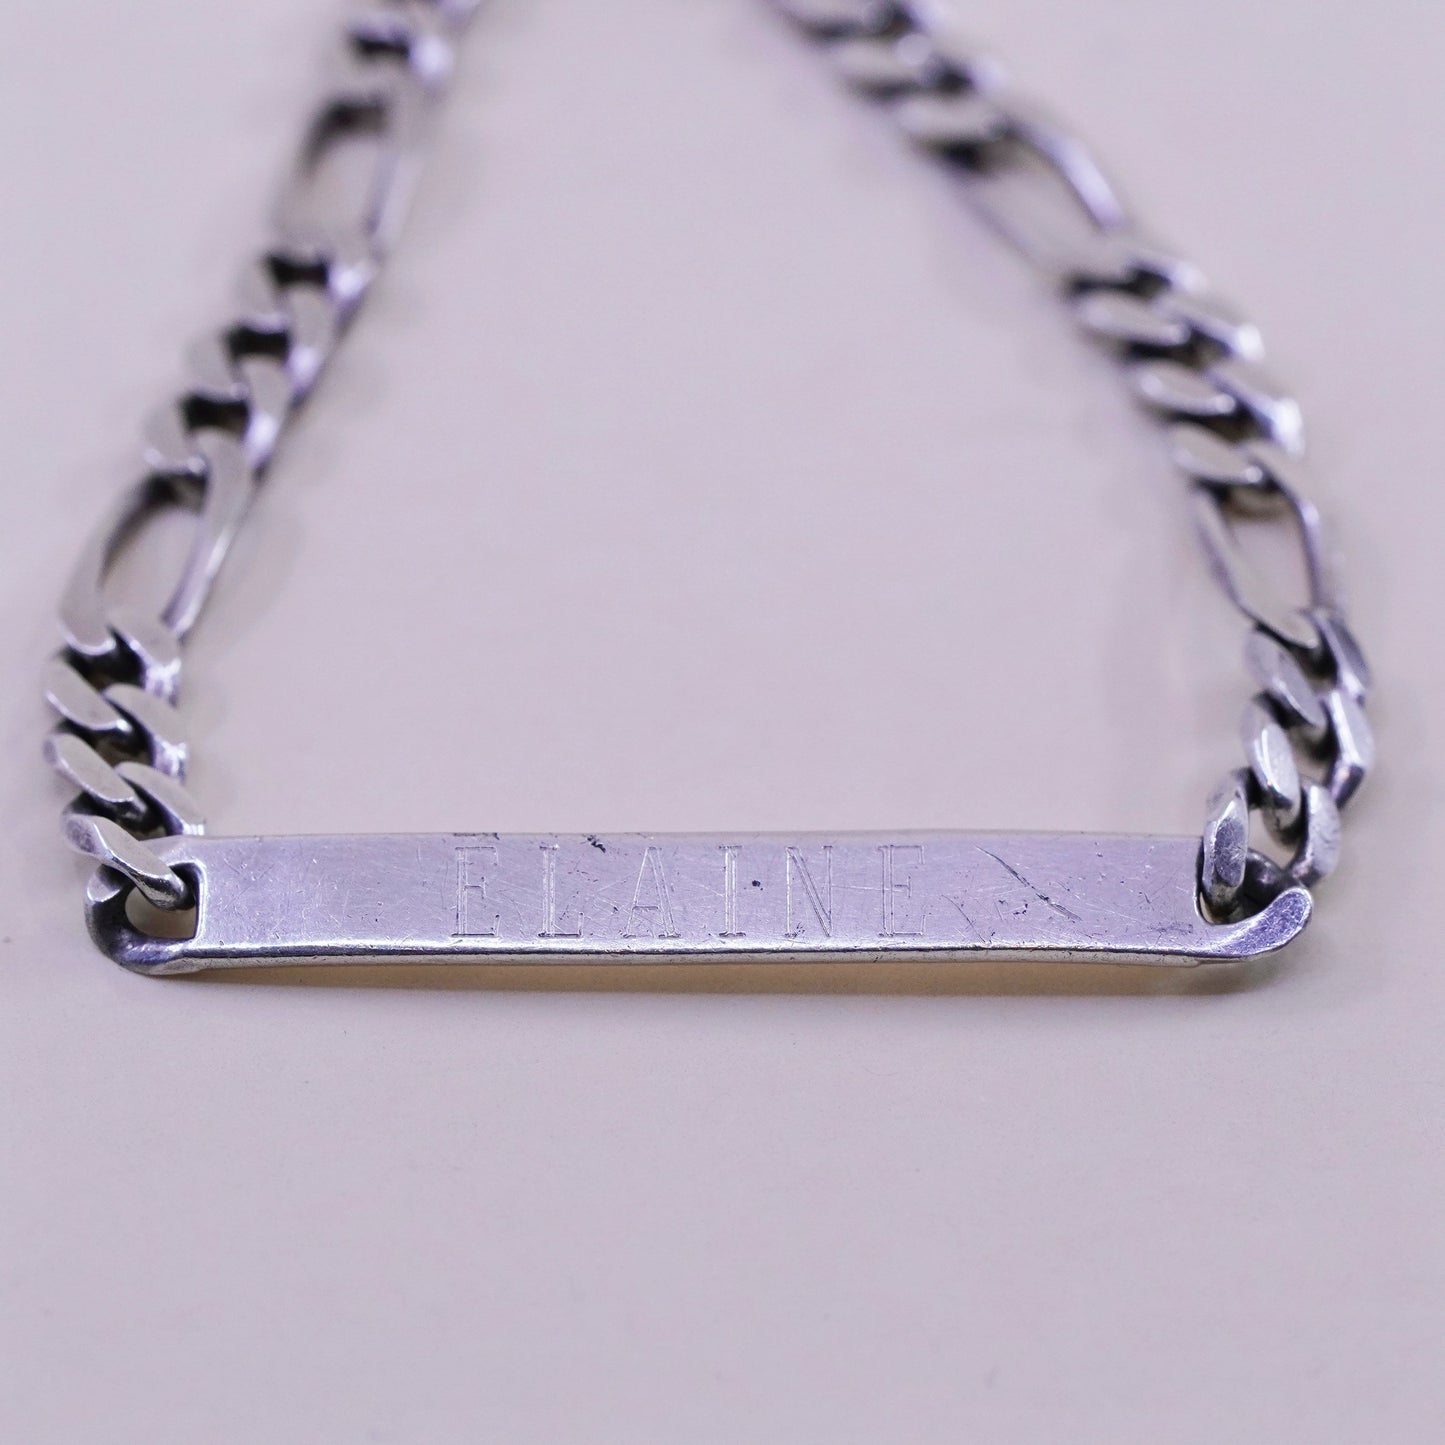 8” Sterling silver bracelet, 925 figaro chain name tag engraved “Elaine”